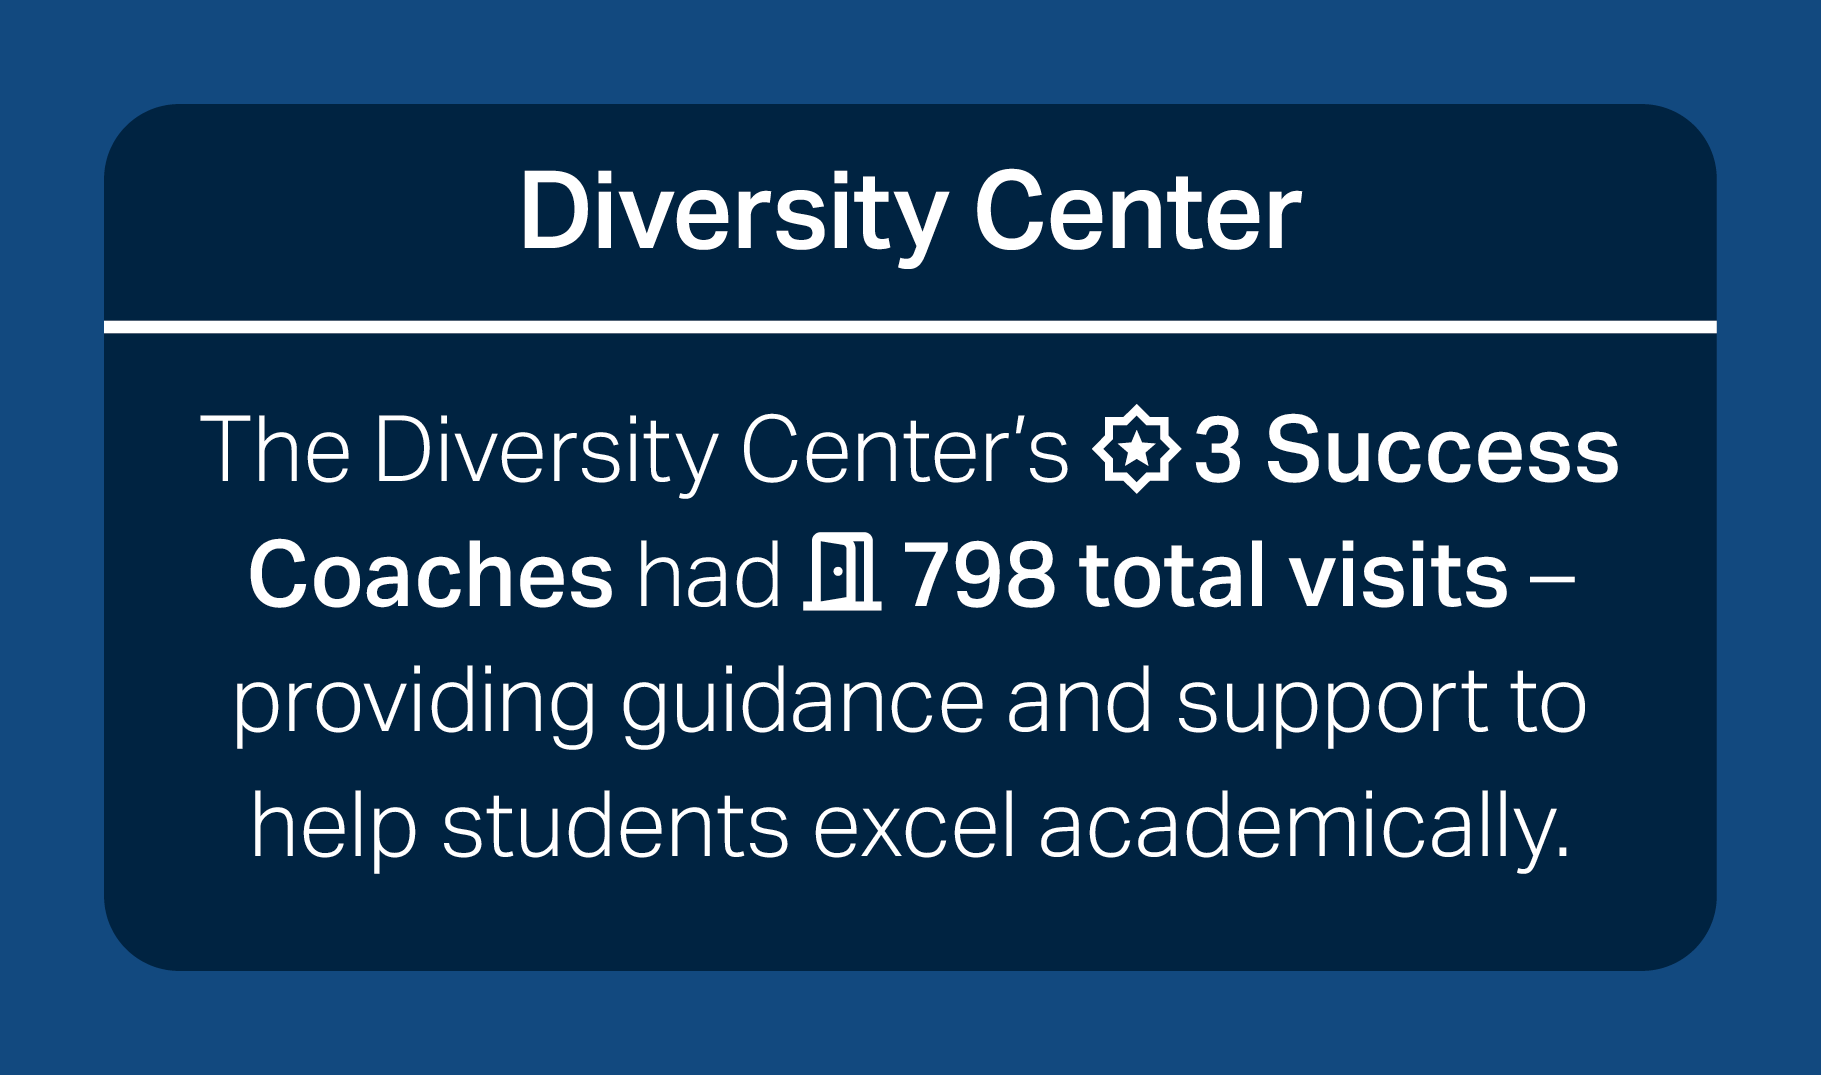 Diversity center. The diversity center's 3 success coaches had 798 total visits providing guidance and support to help students excel academically